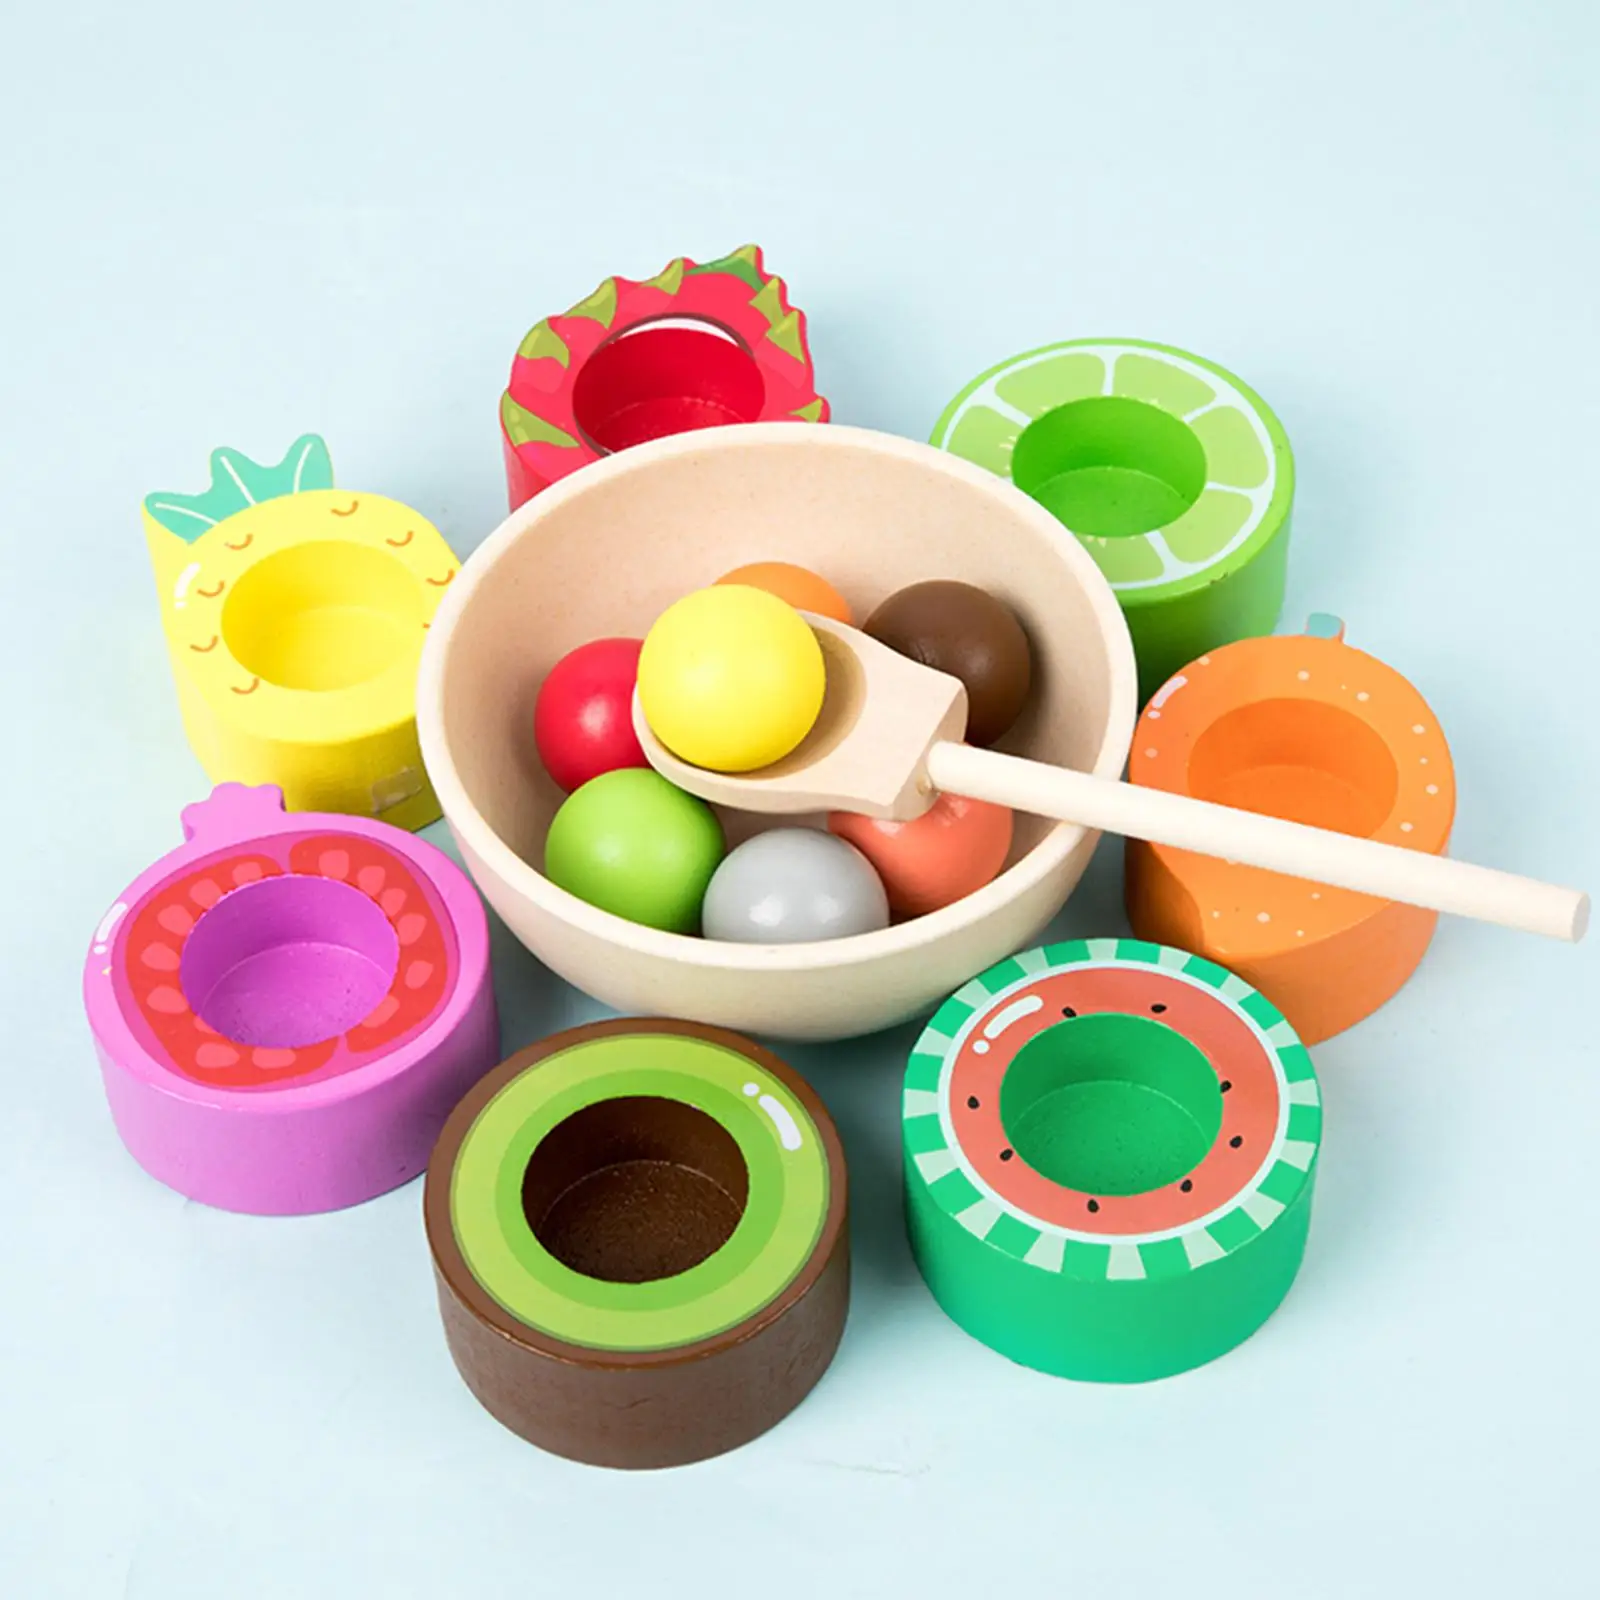 Montessori Toys Wooden Balls in Cups Preschool Sensory Toys Colorful Balls Color Sorting for Age 3 4 5 6 Boys Holiday Gifts